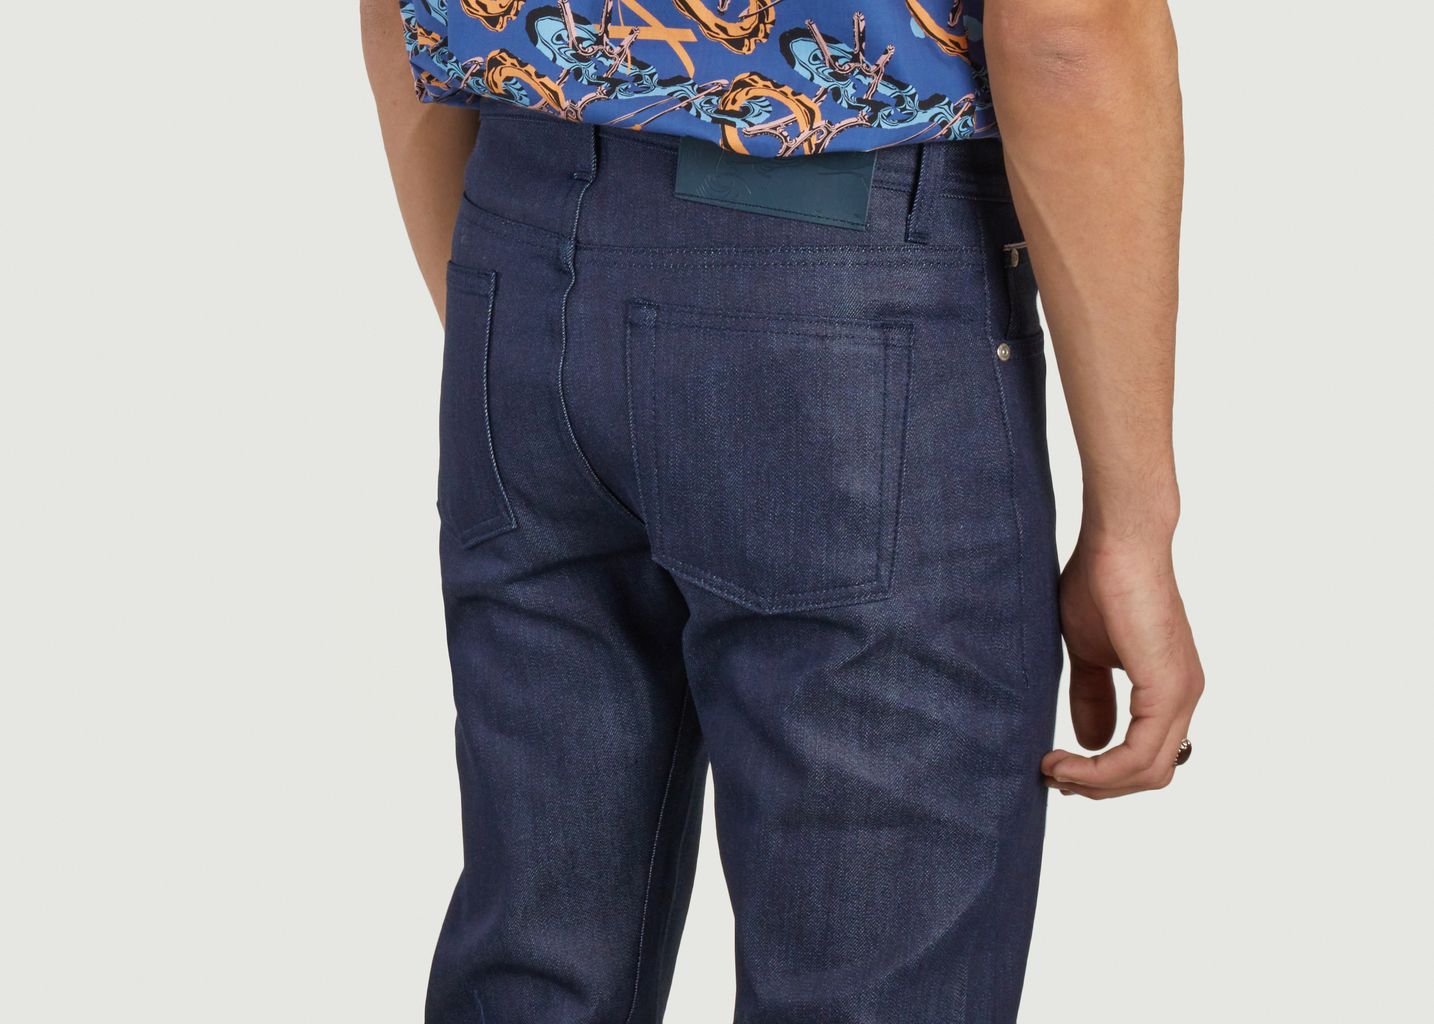 Jean Weird Guy Spring Garden Selvedge - Naked and Famous